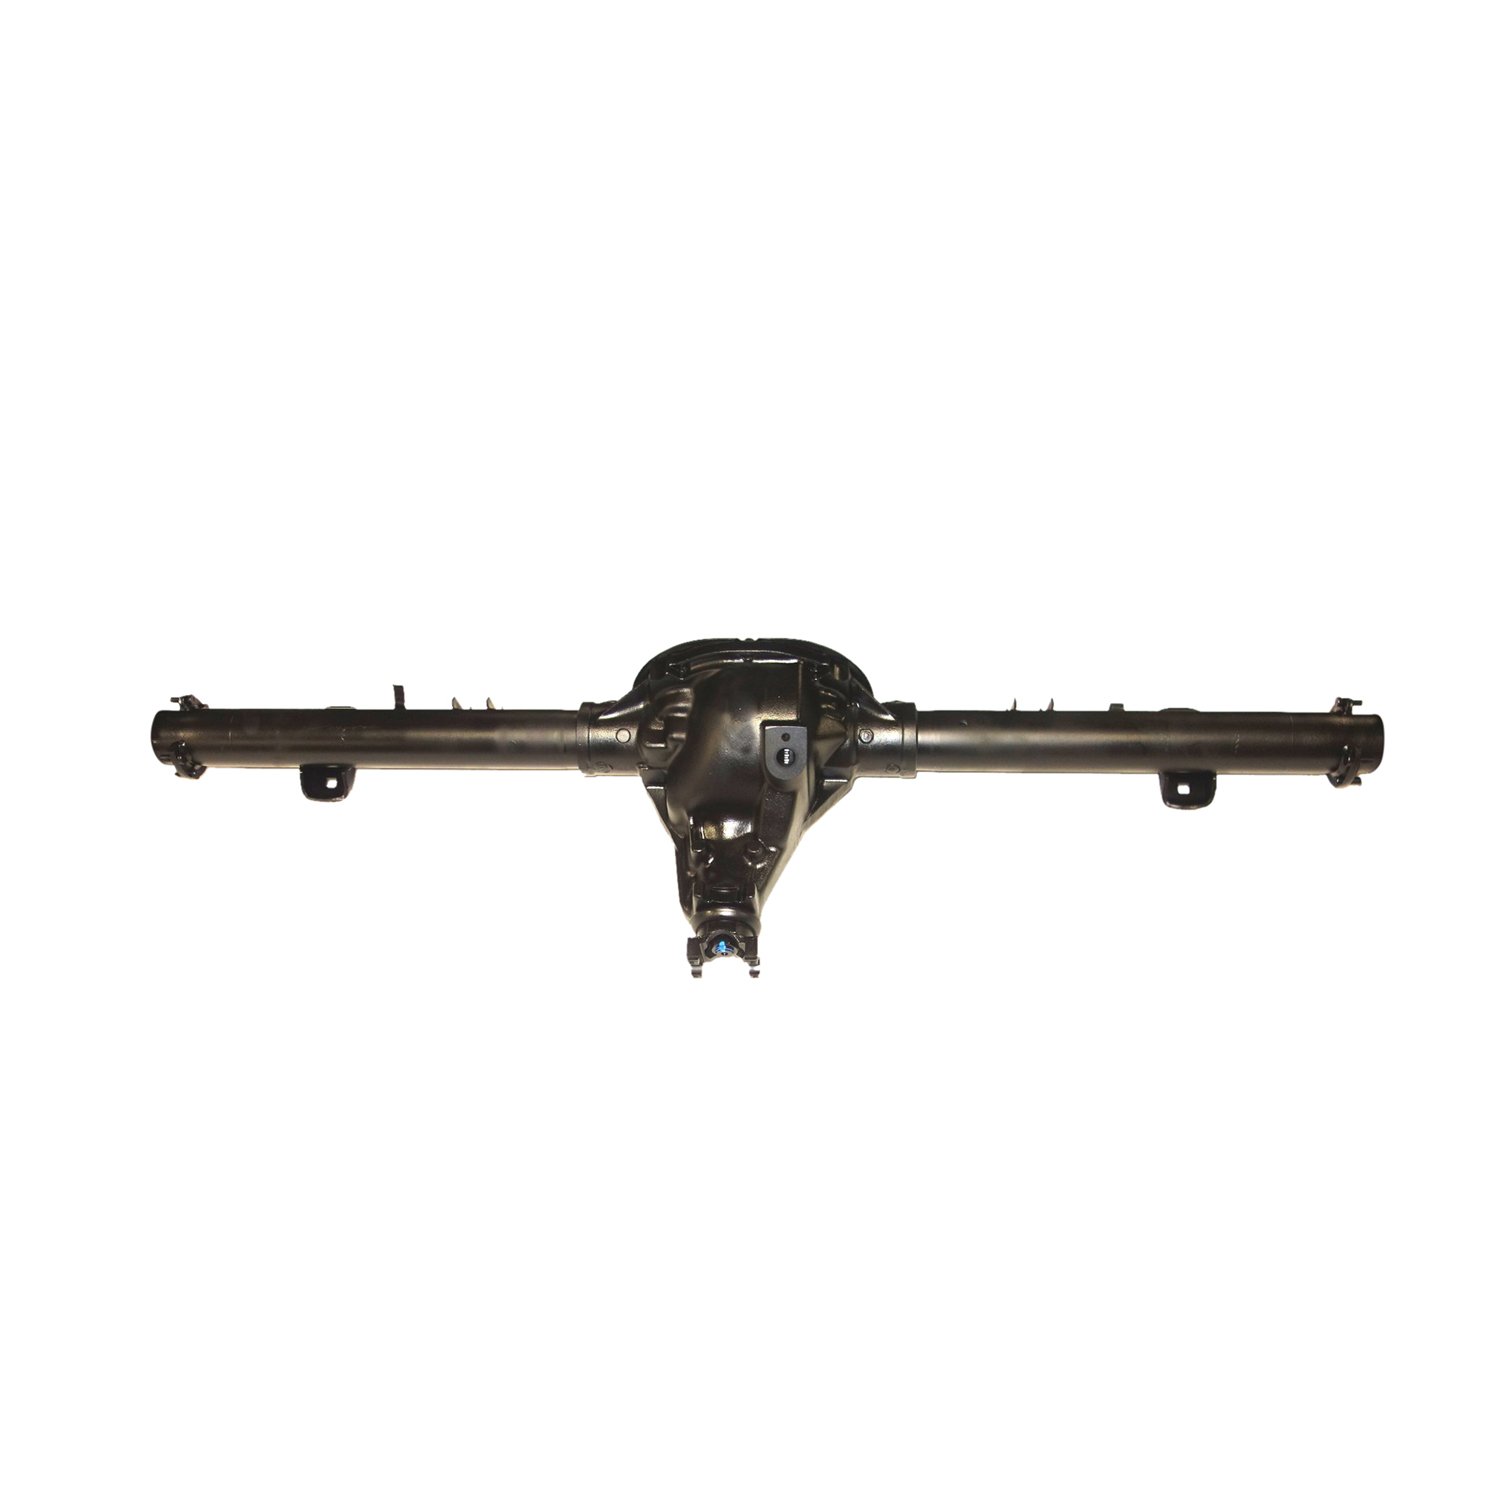 Remanufactured Axle Assy for Chy 8.25" 1989 1/2 Ton, D100, D150 2.94, 2wd, Posi LSD